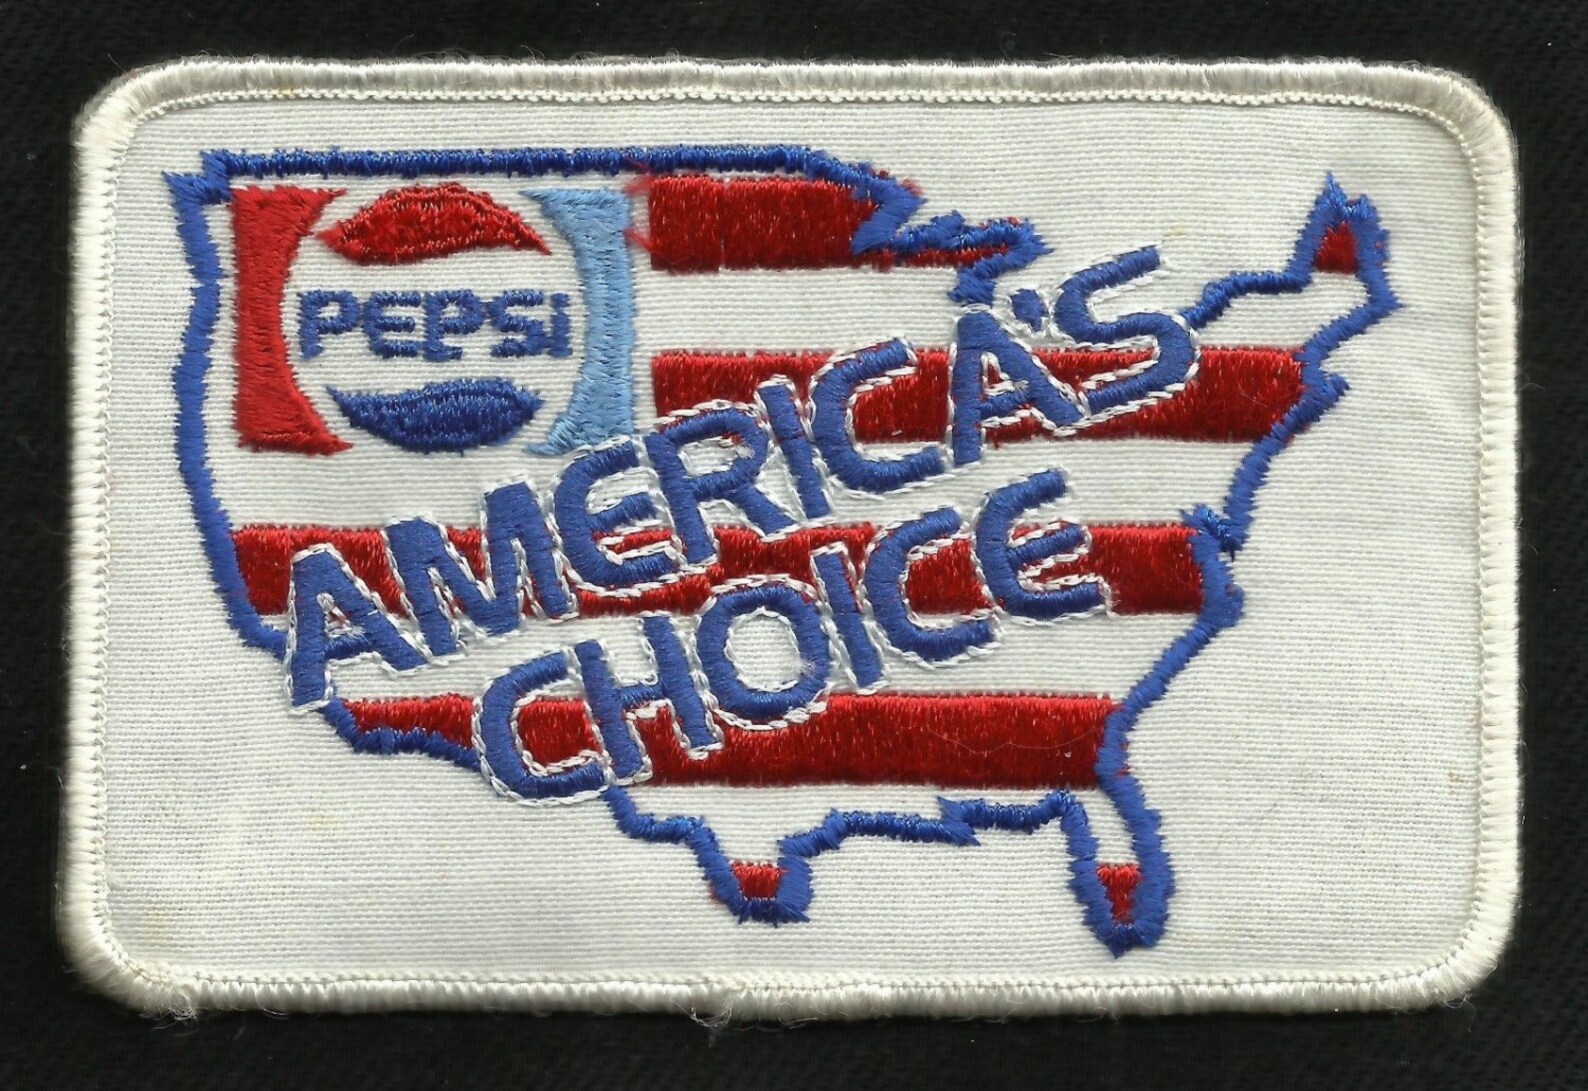 Collection patch